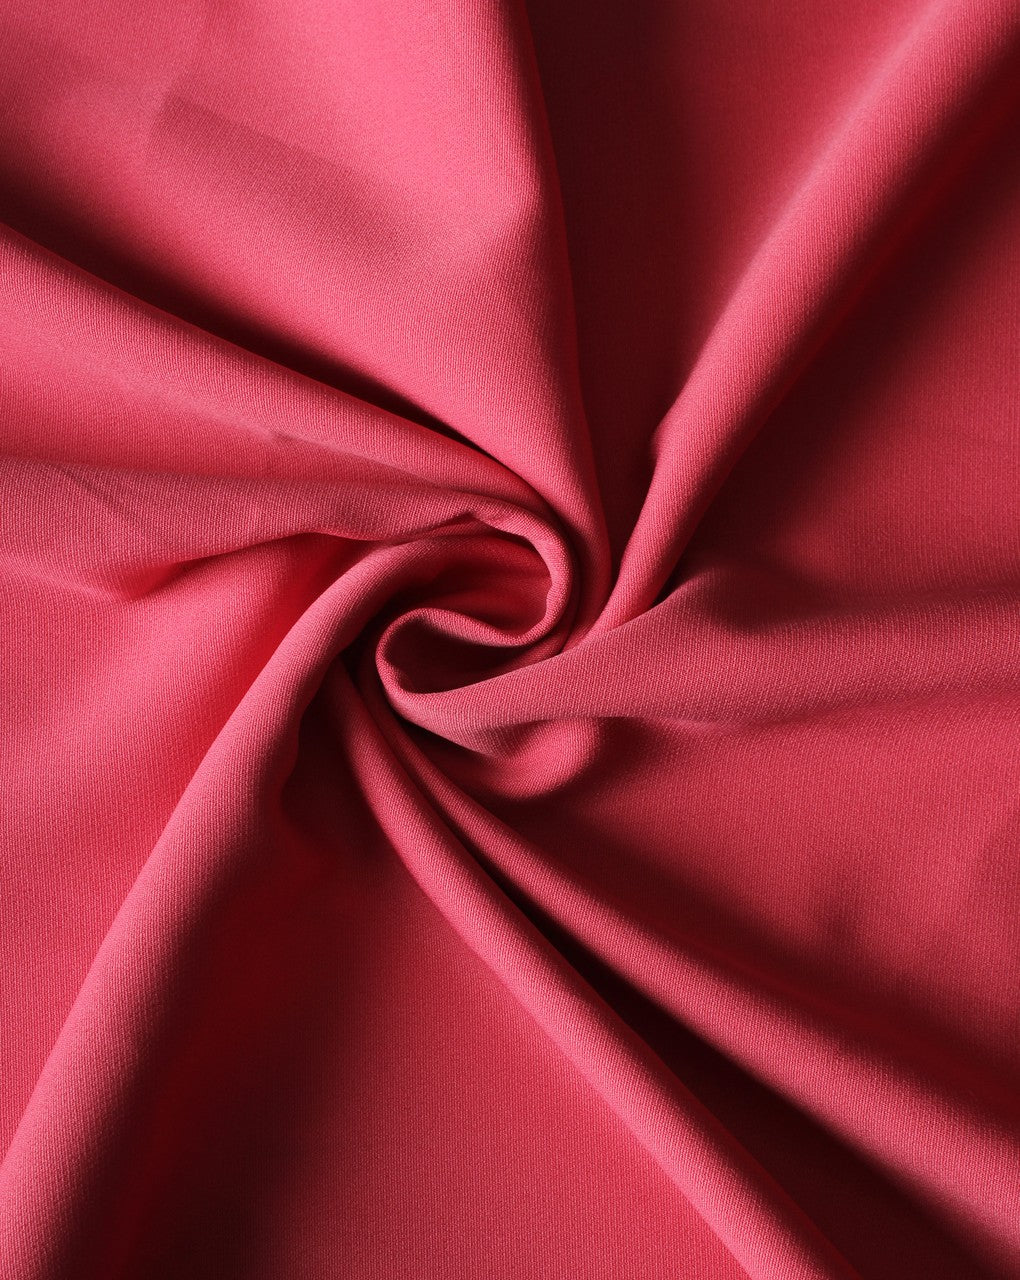 Plain Pink Polyester Crepe Fabric